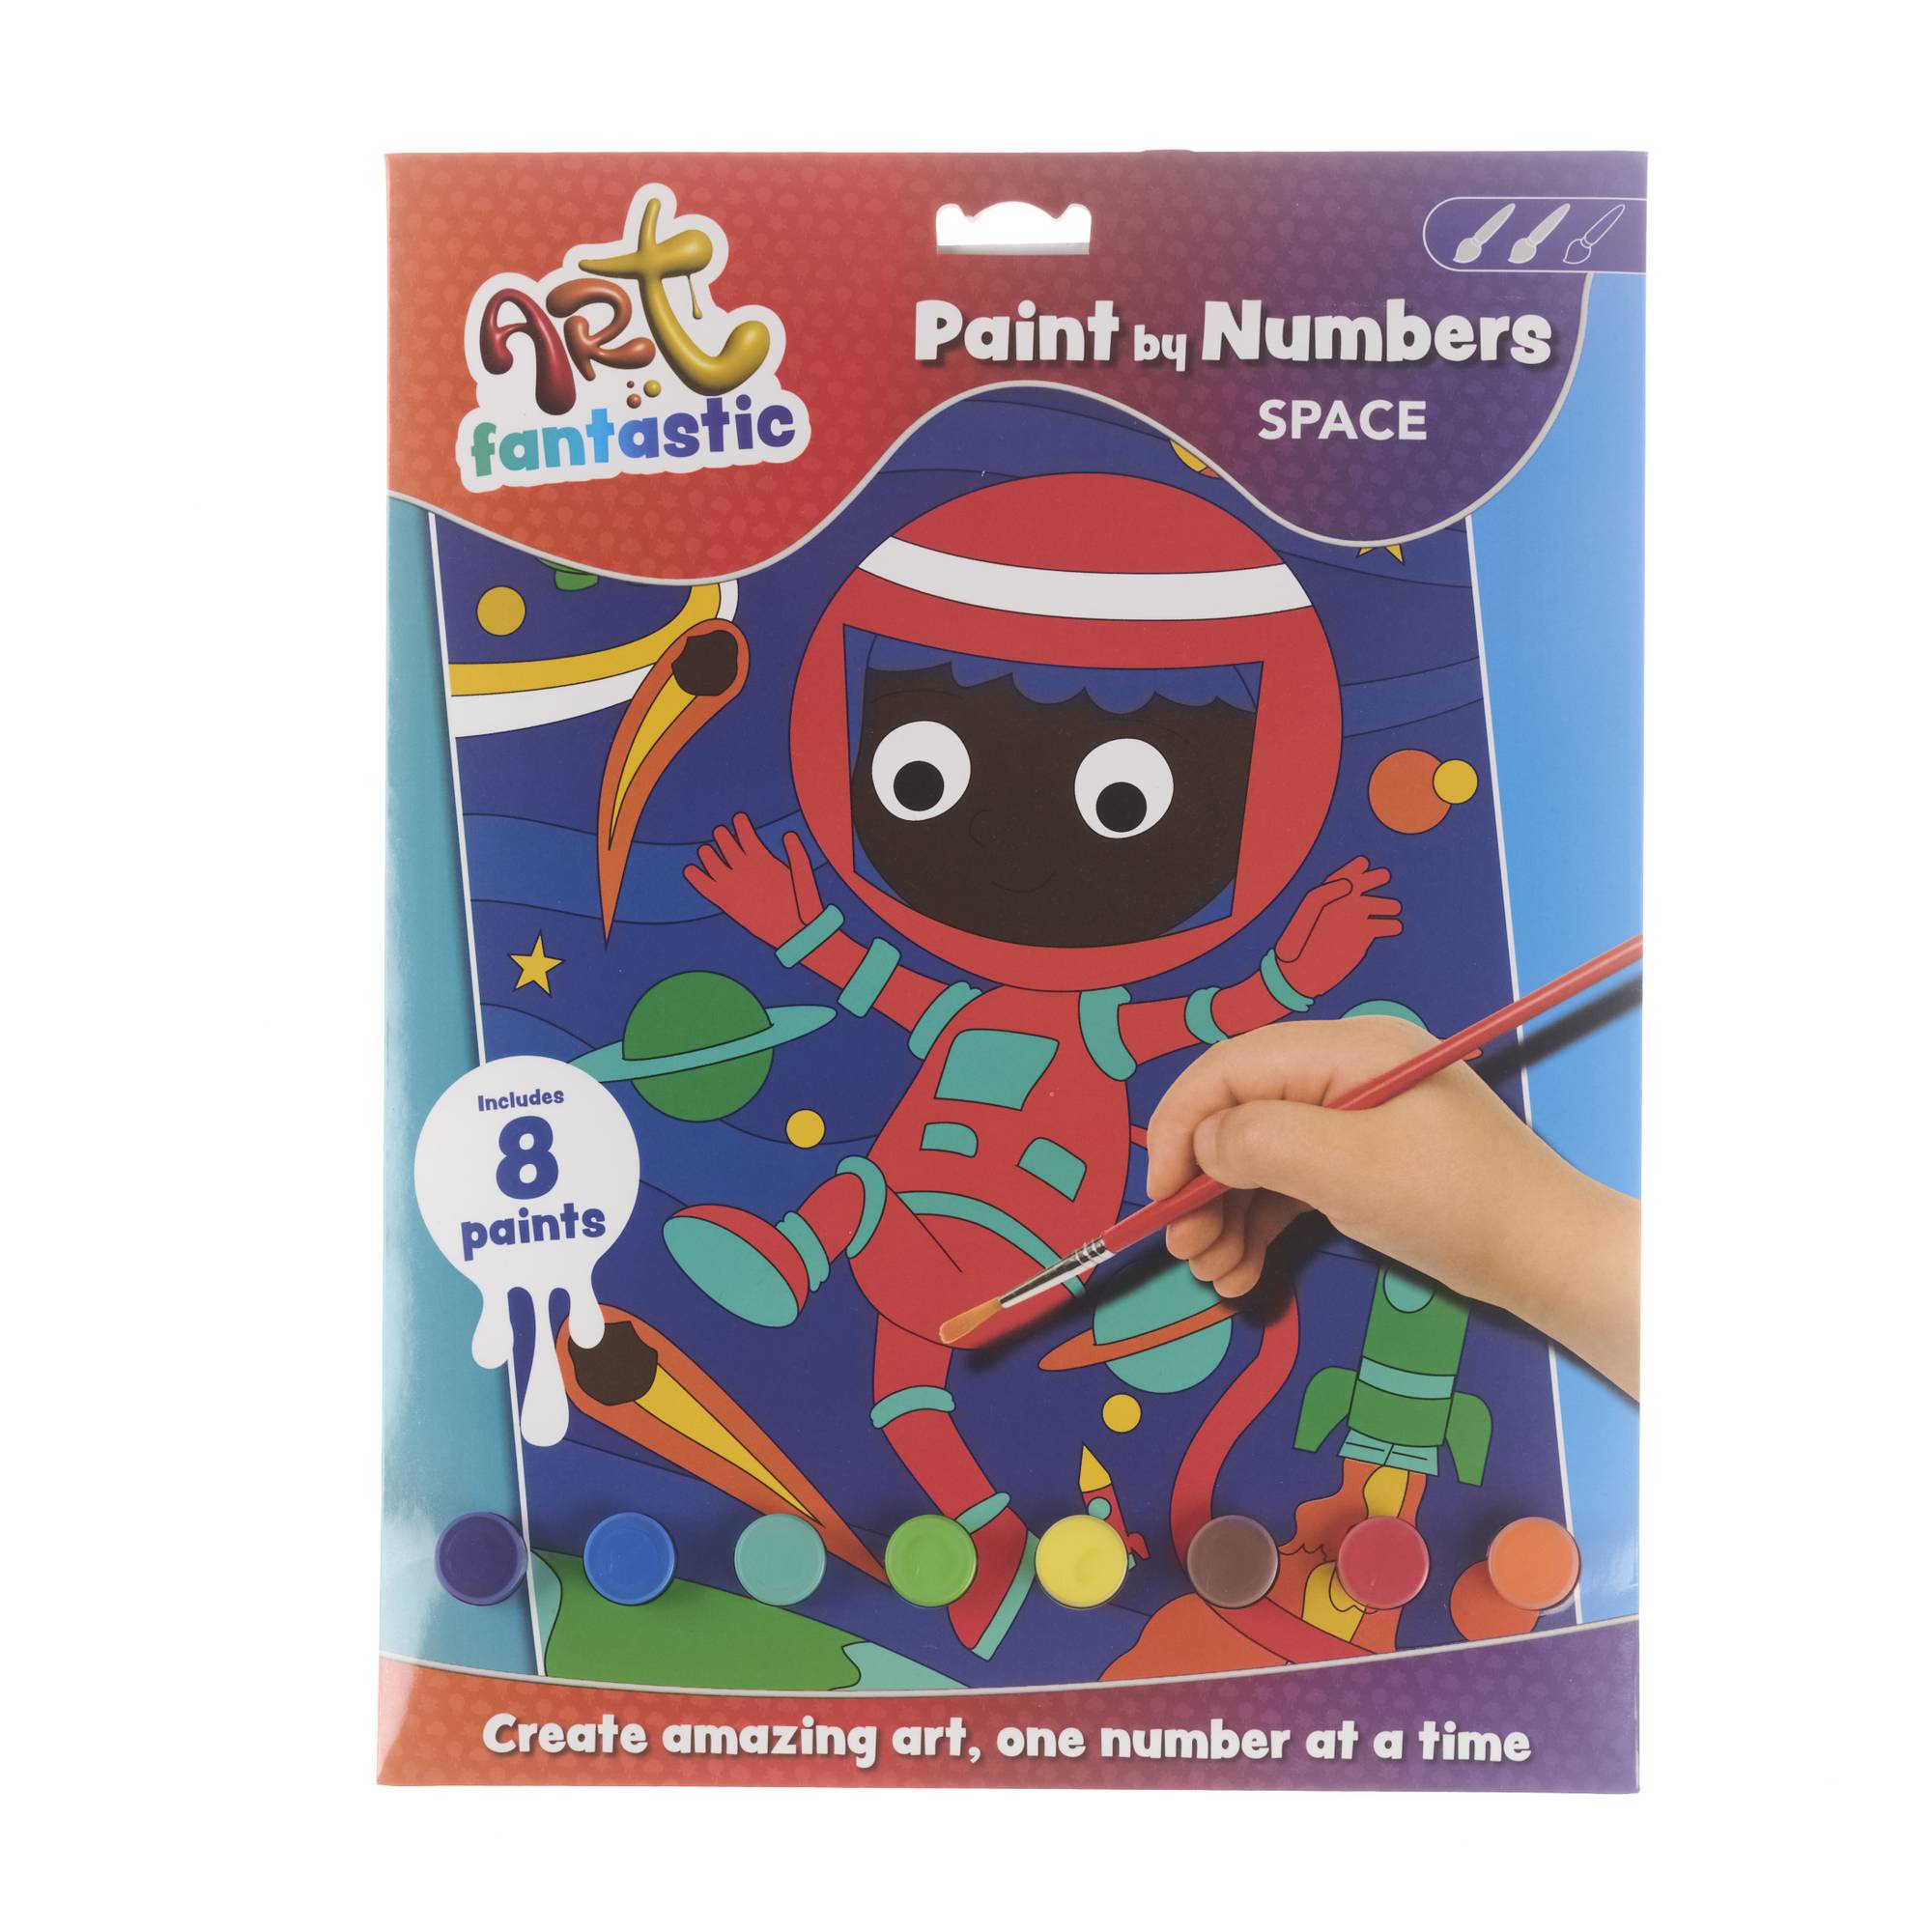 Hobbycraft paint by numbers